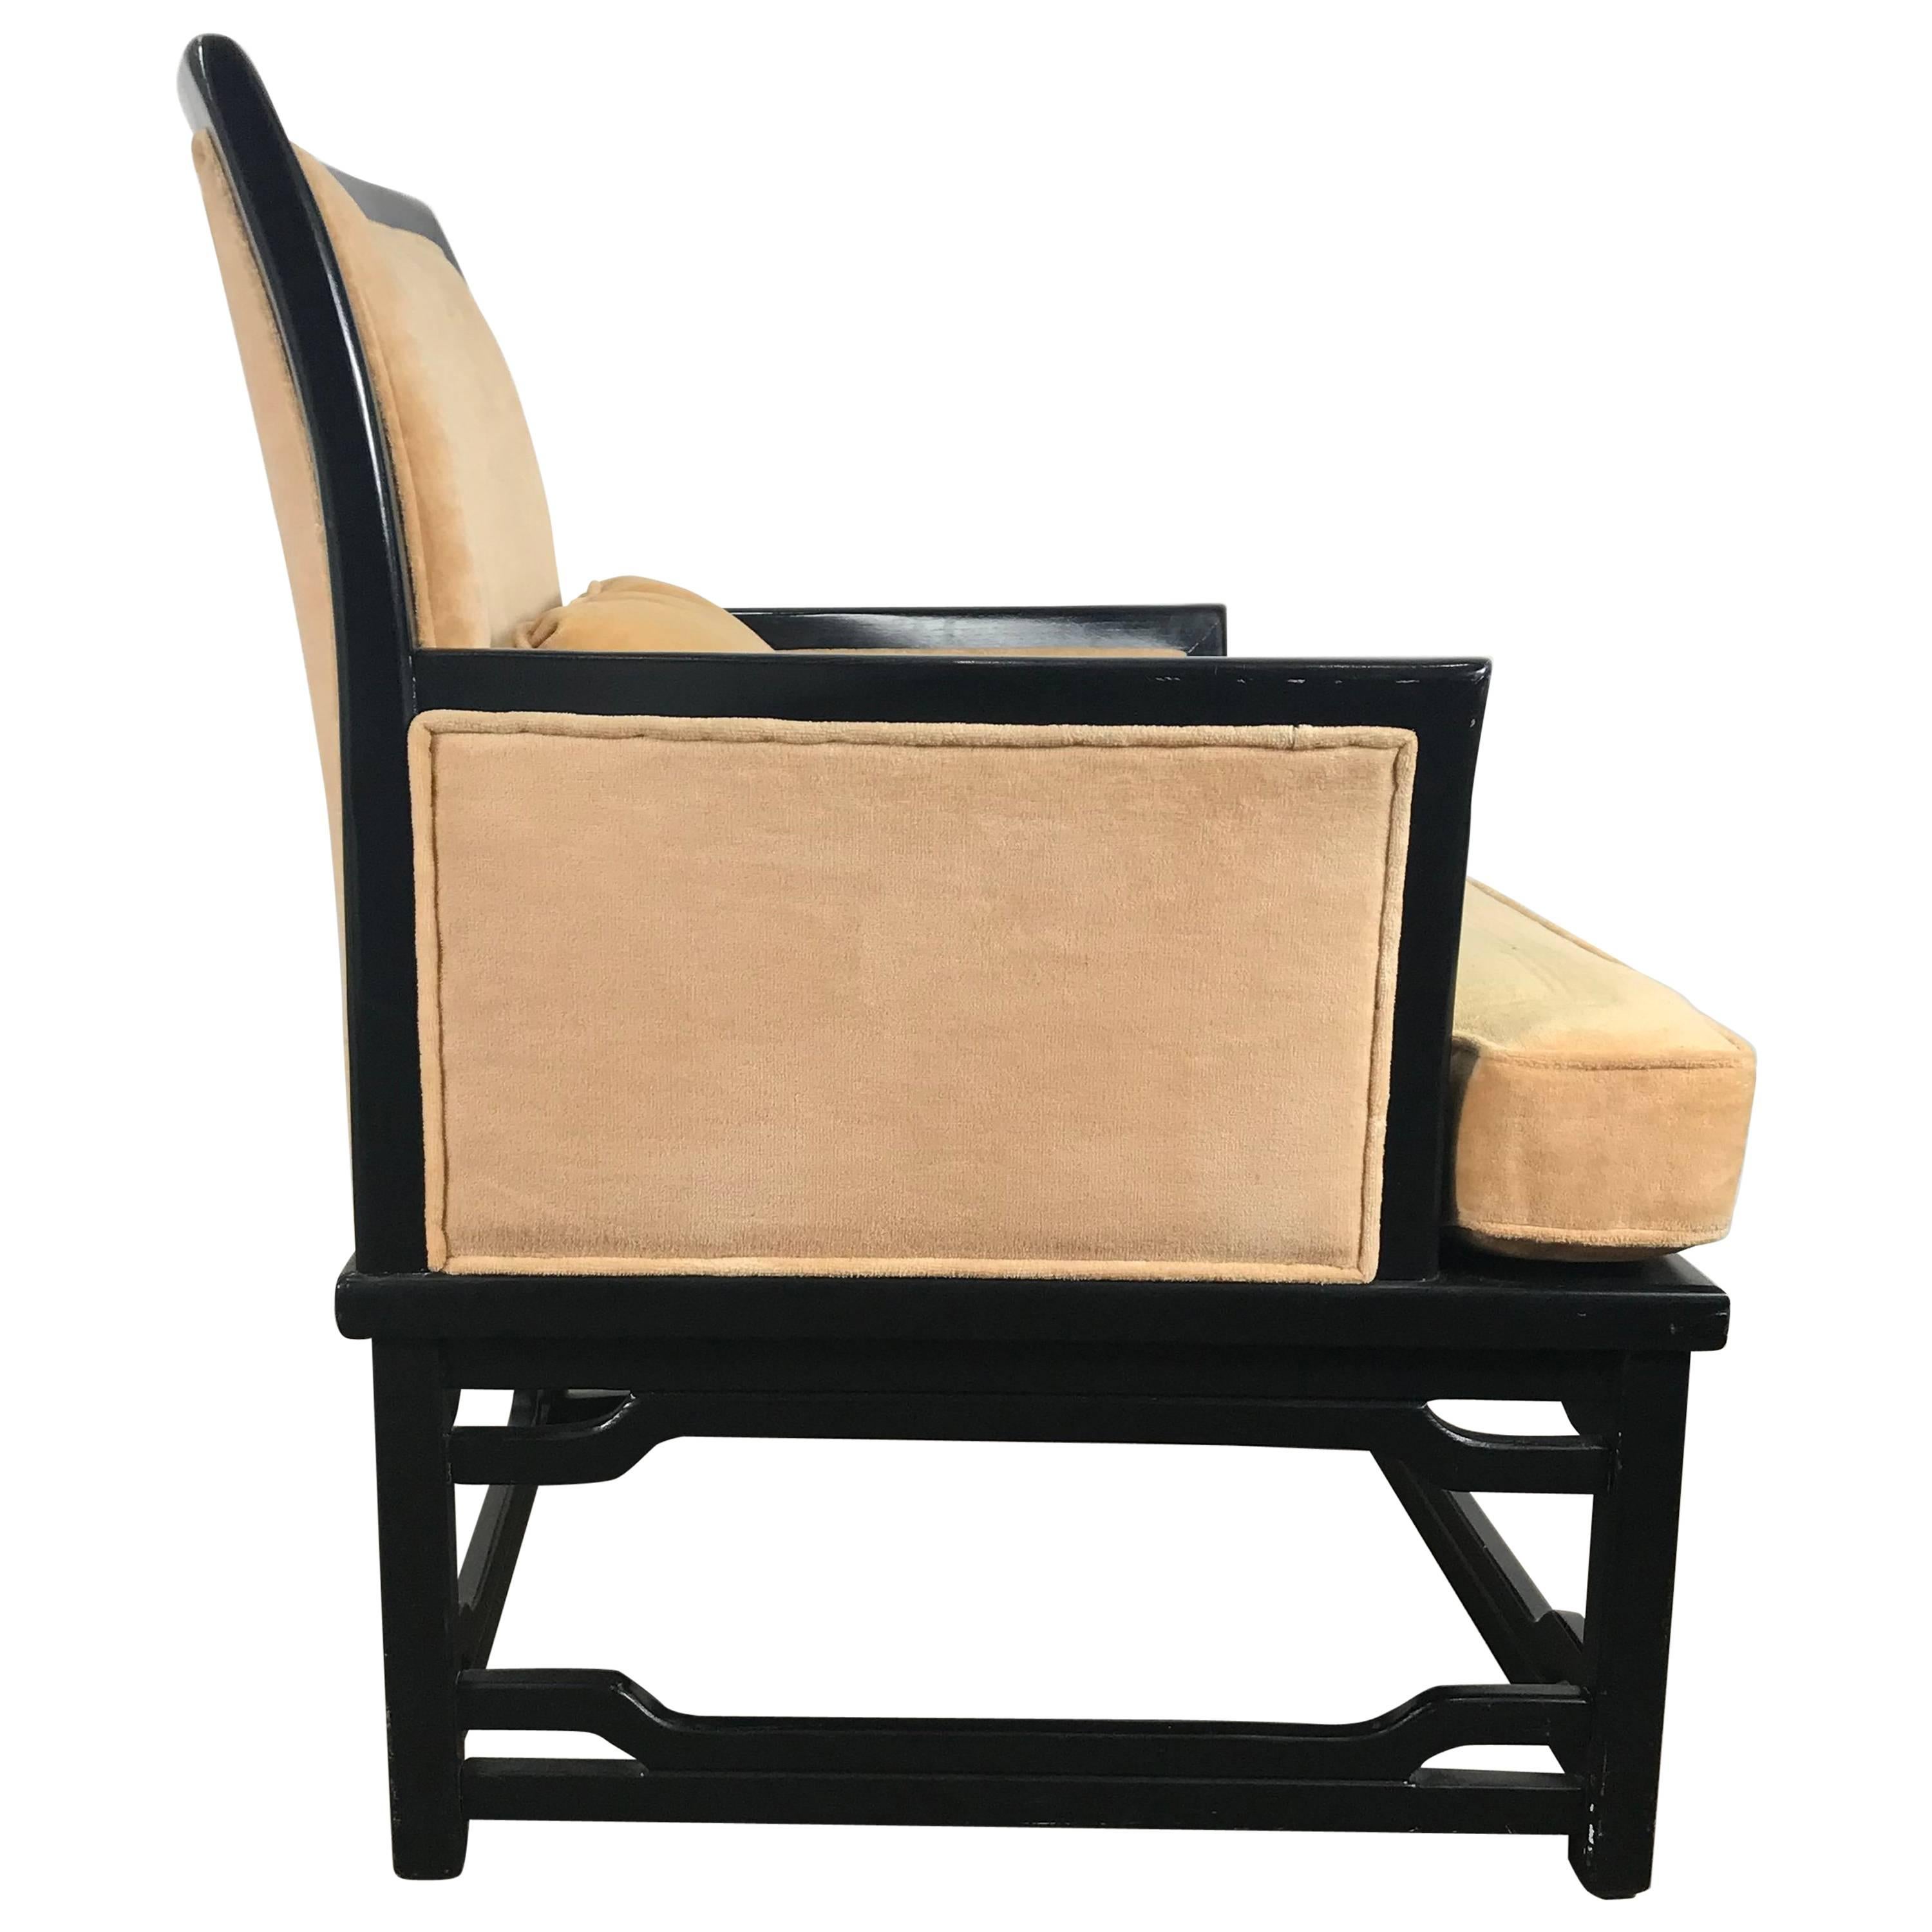 Black Lacquer and Velvet Asian Modern Armchair by Hibriten after James Mont